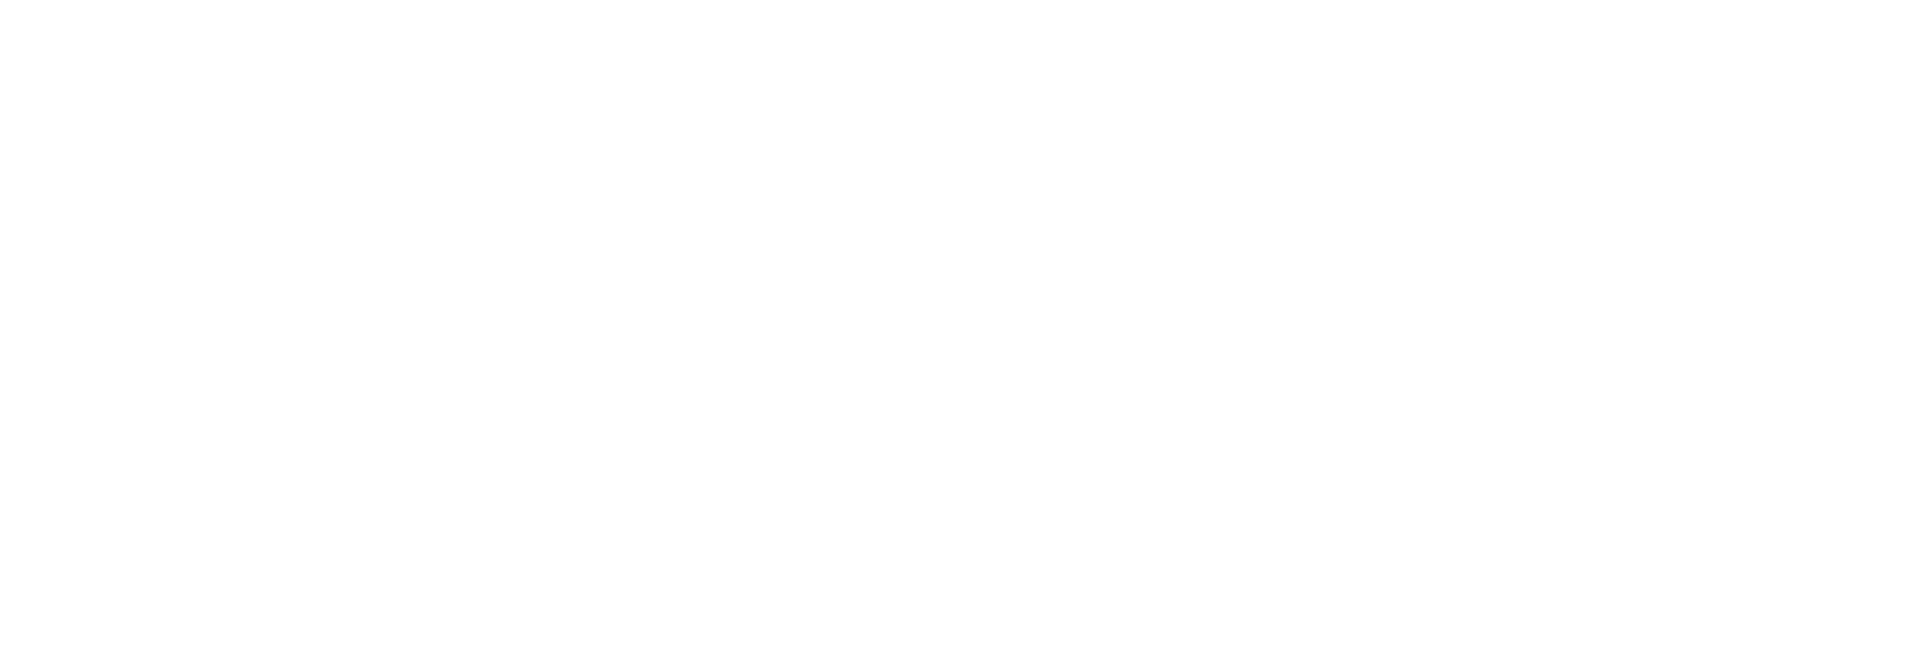 your homes Newcastle logo